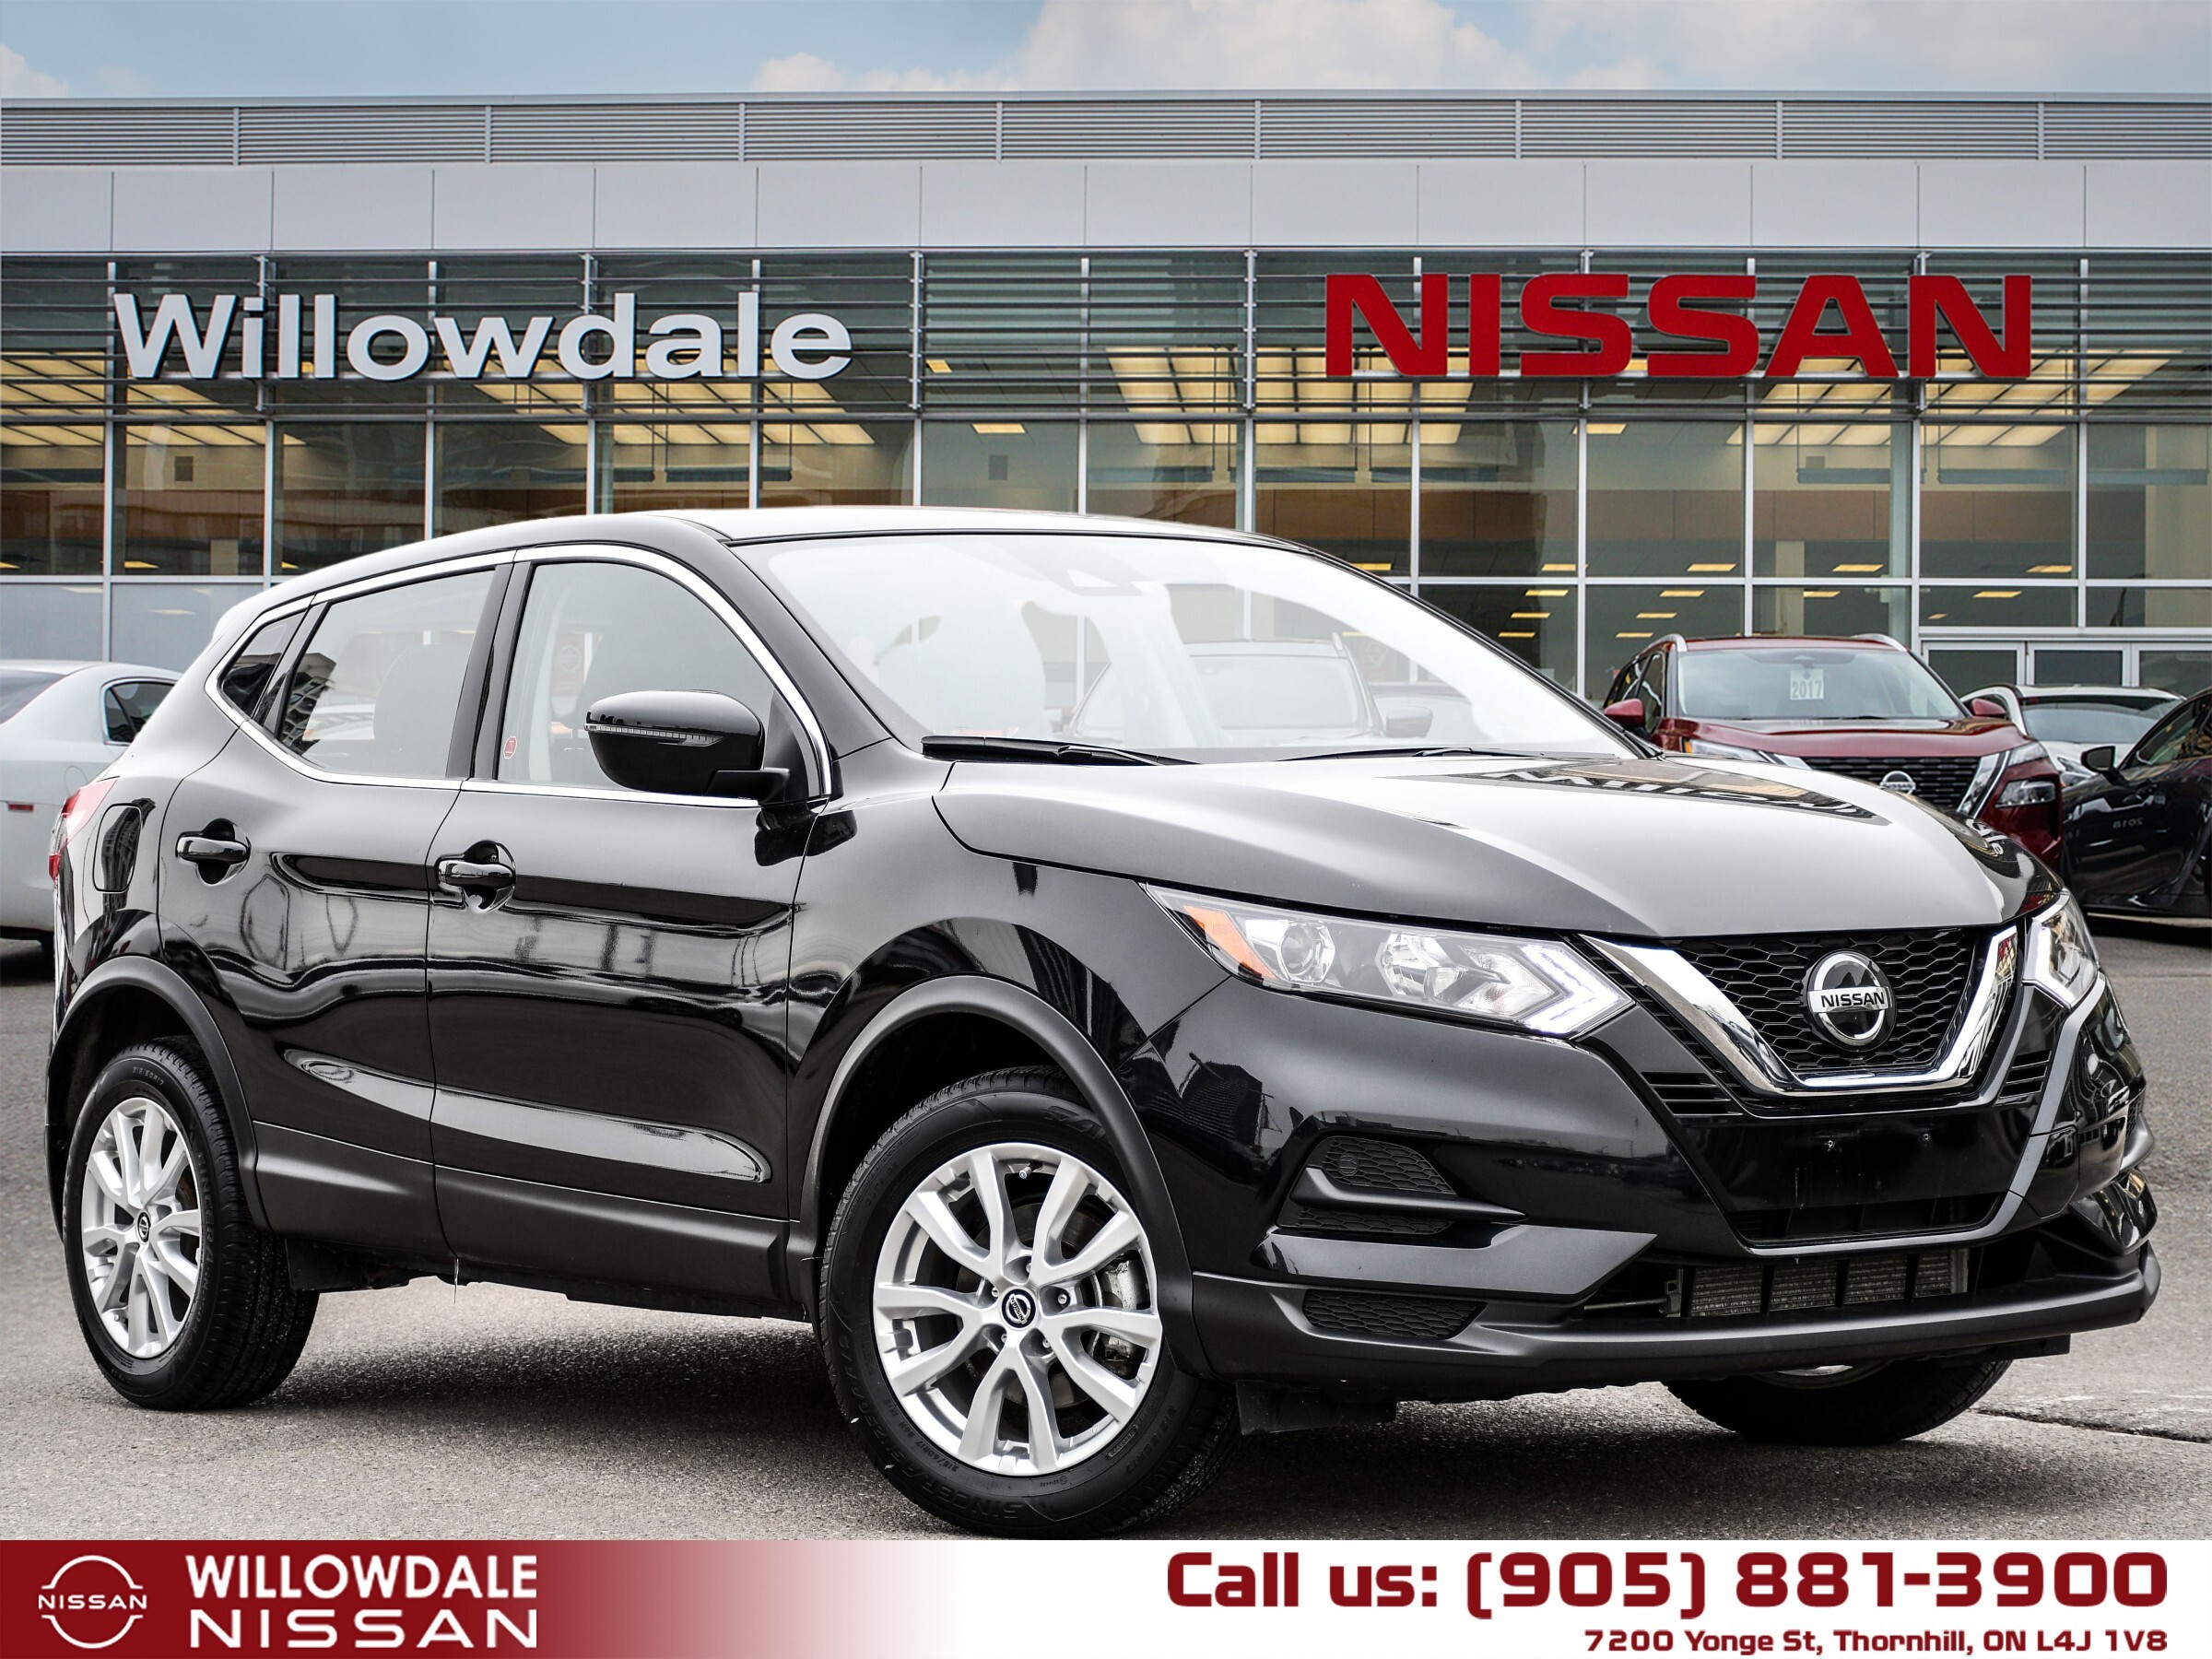 2021 Nissan Qashqai S - SALE EVENT MAY 24- MAY 25